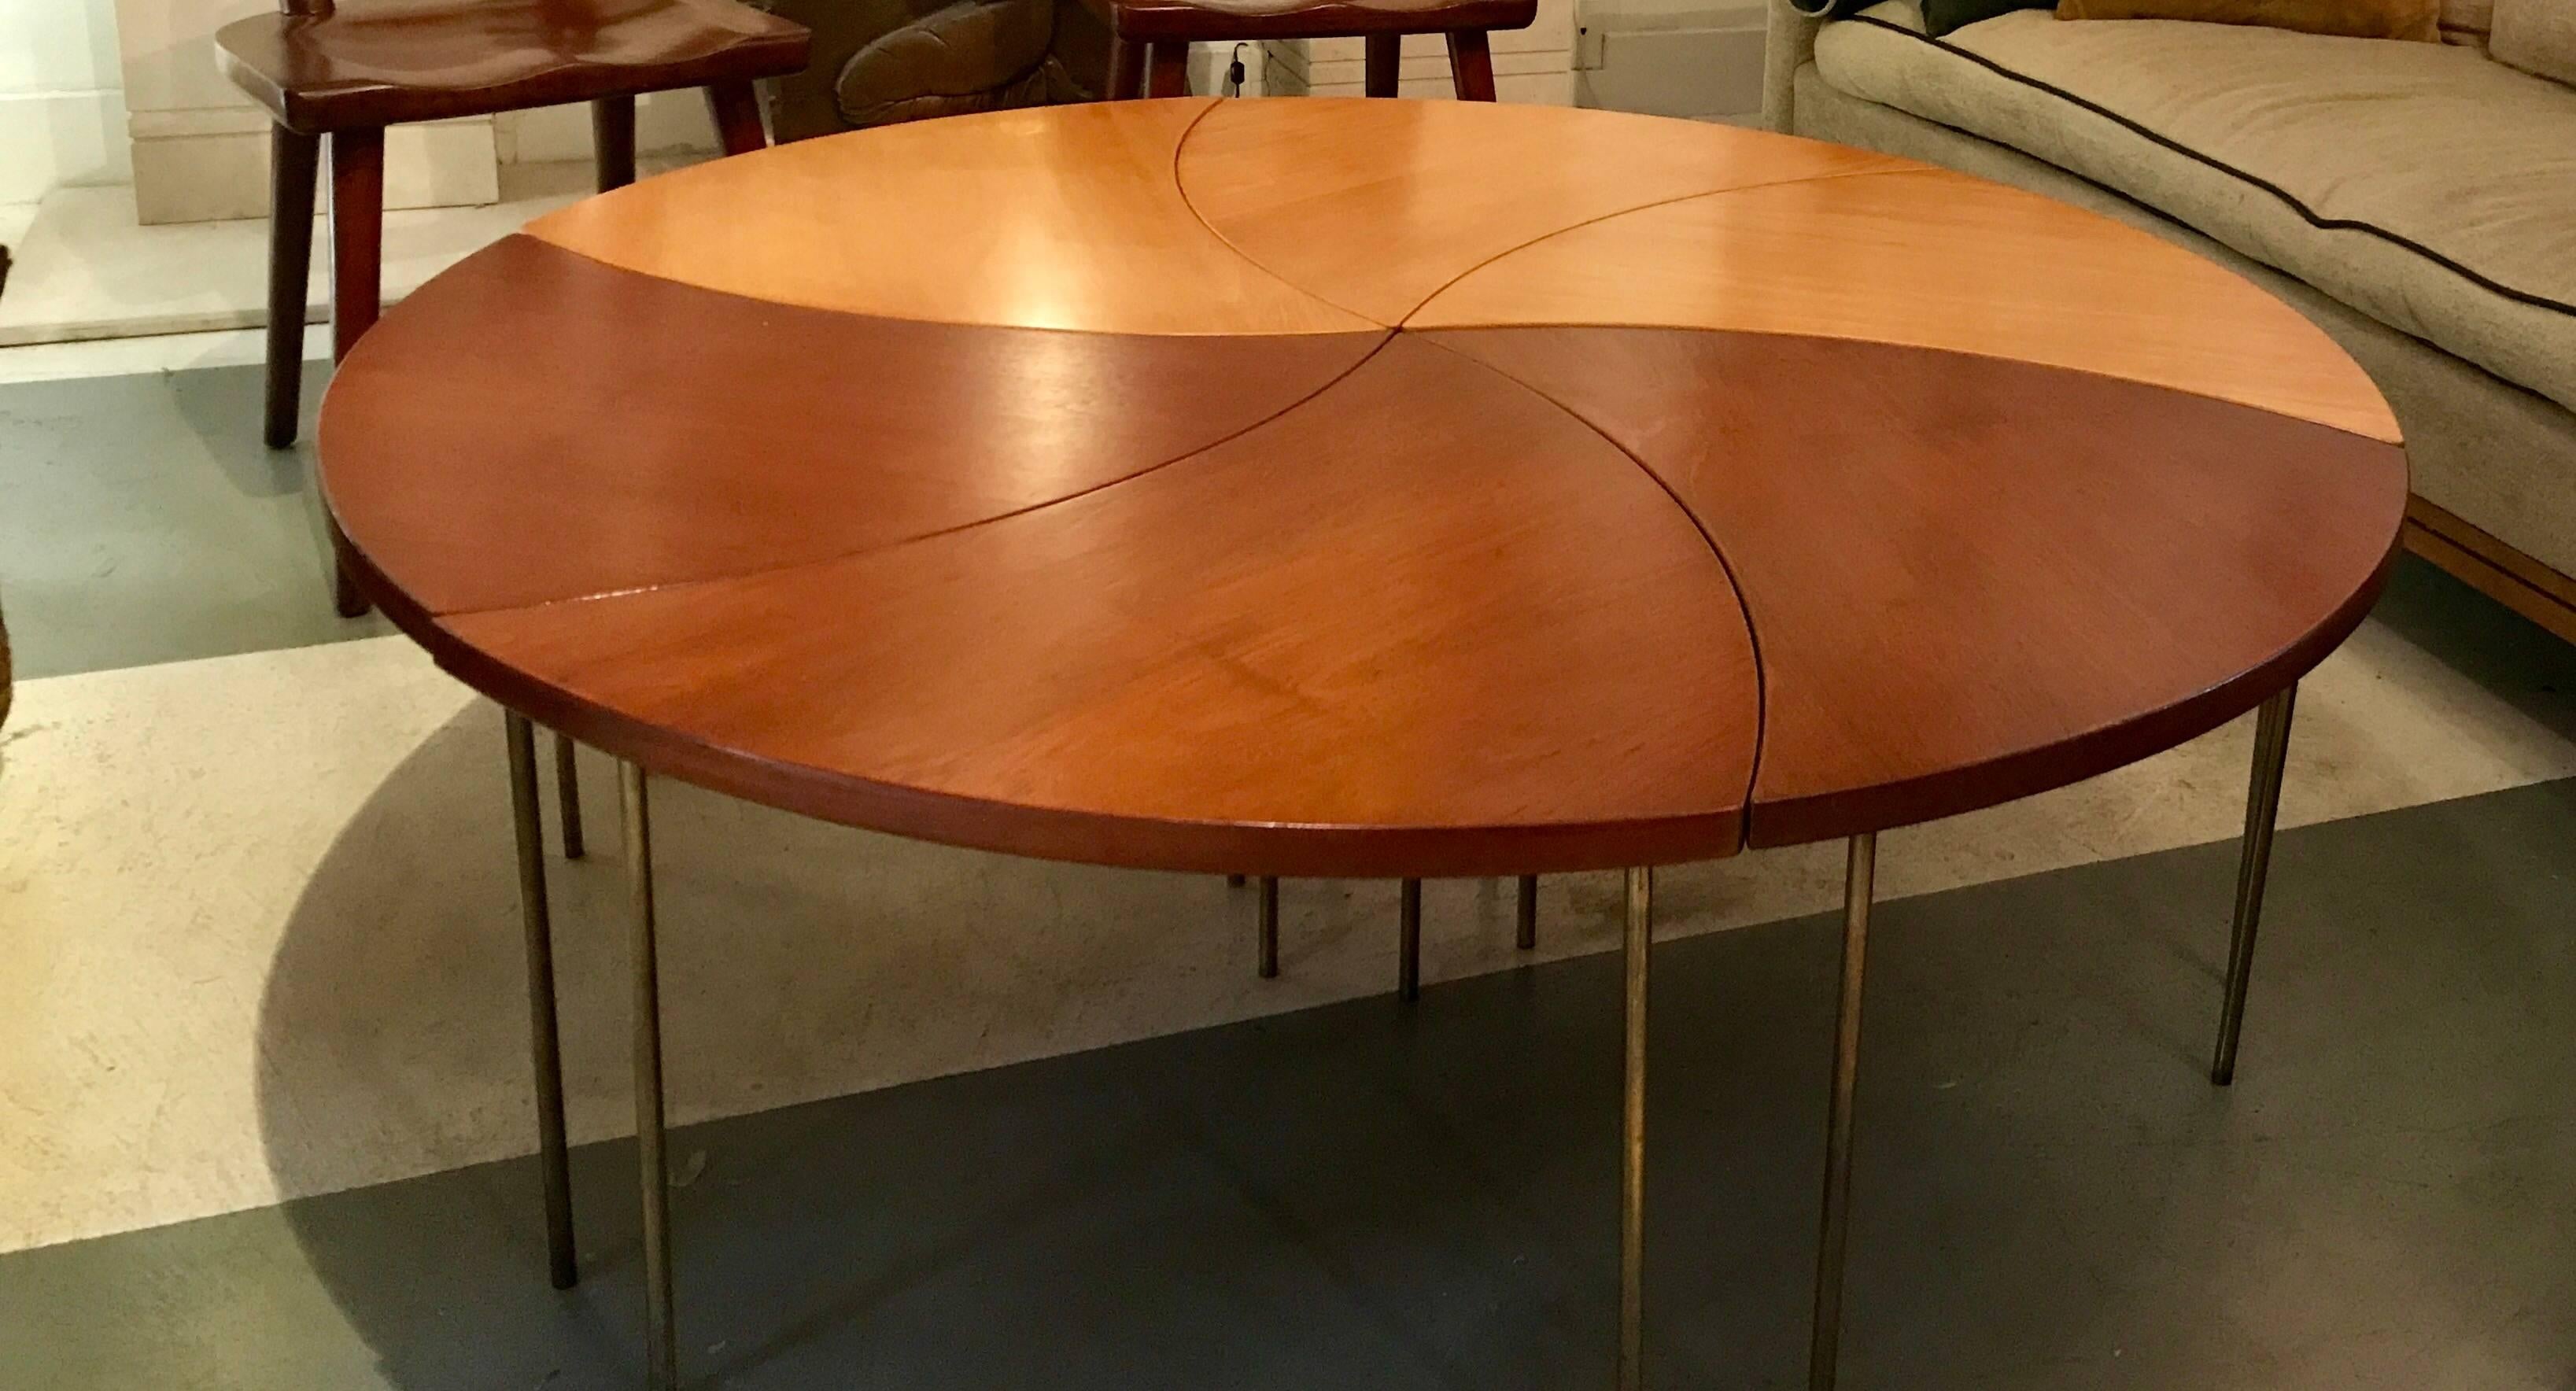 A Mid-Century Modern private commission unique edition by my architect father from John Stuart International in 1950. This one and only 2-tone uniquely colored veneers in half light and half dark teak wood-6 individual Tables which create a large